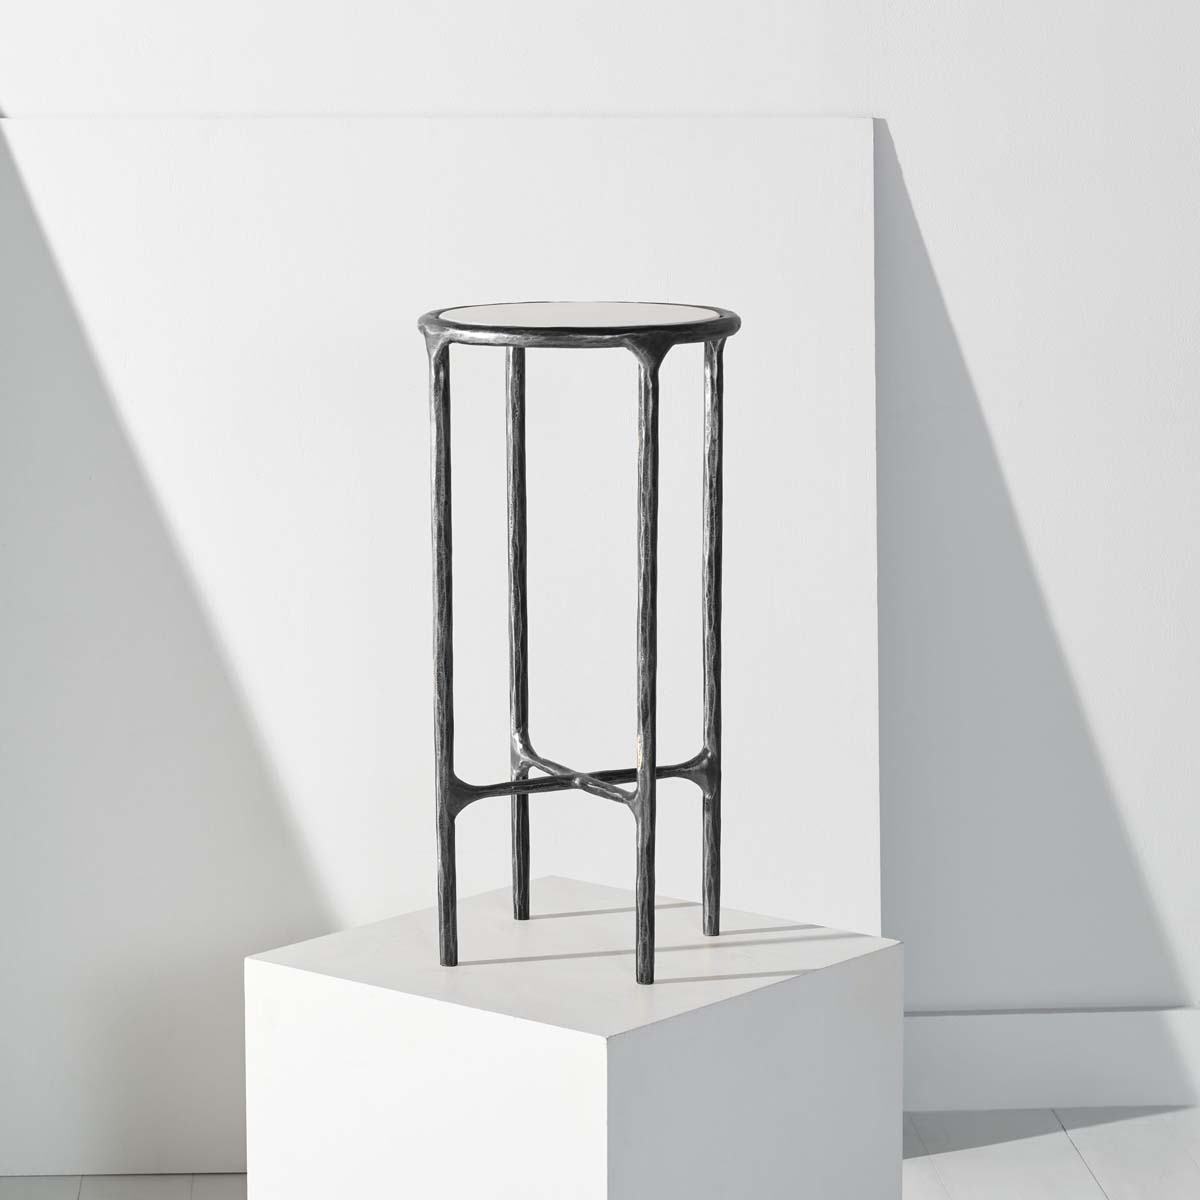 Safavieh Couture Jessa Forged Metal Tall Round End Table - Black / White